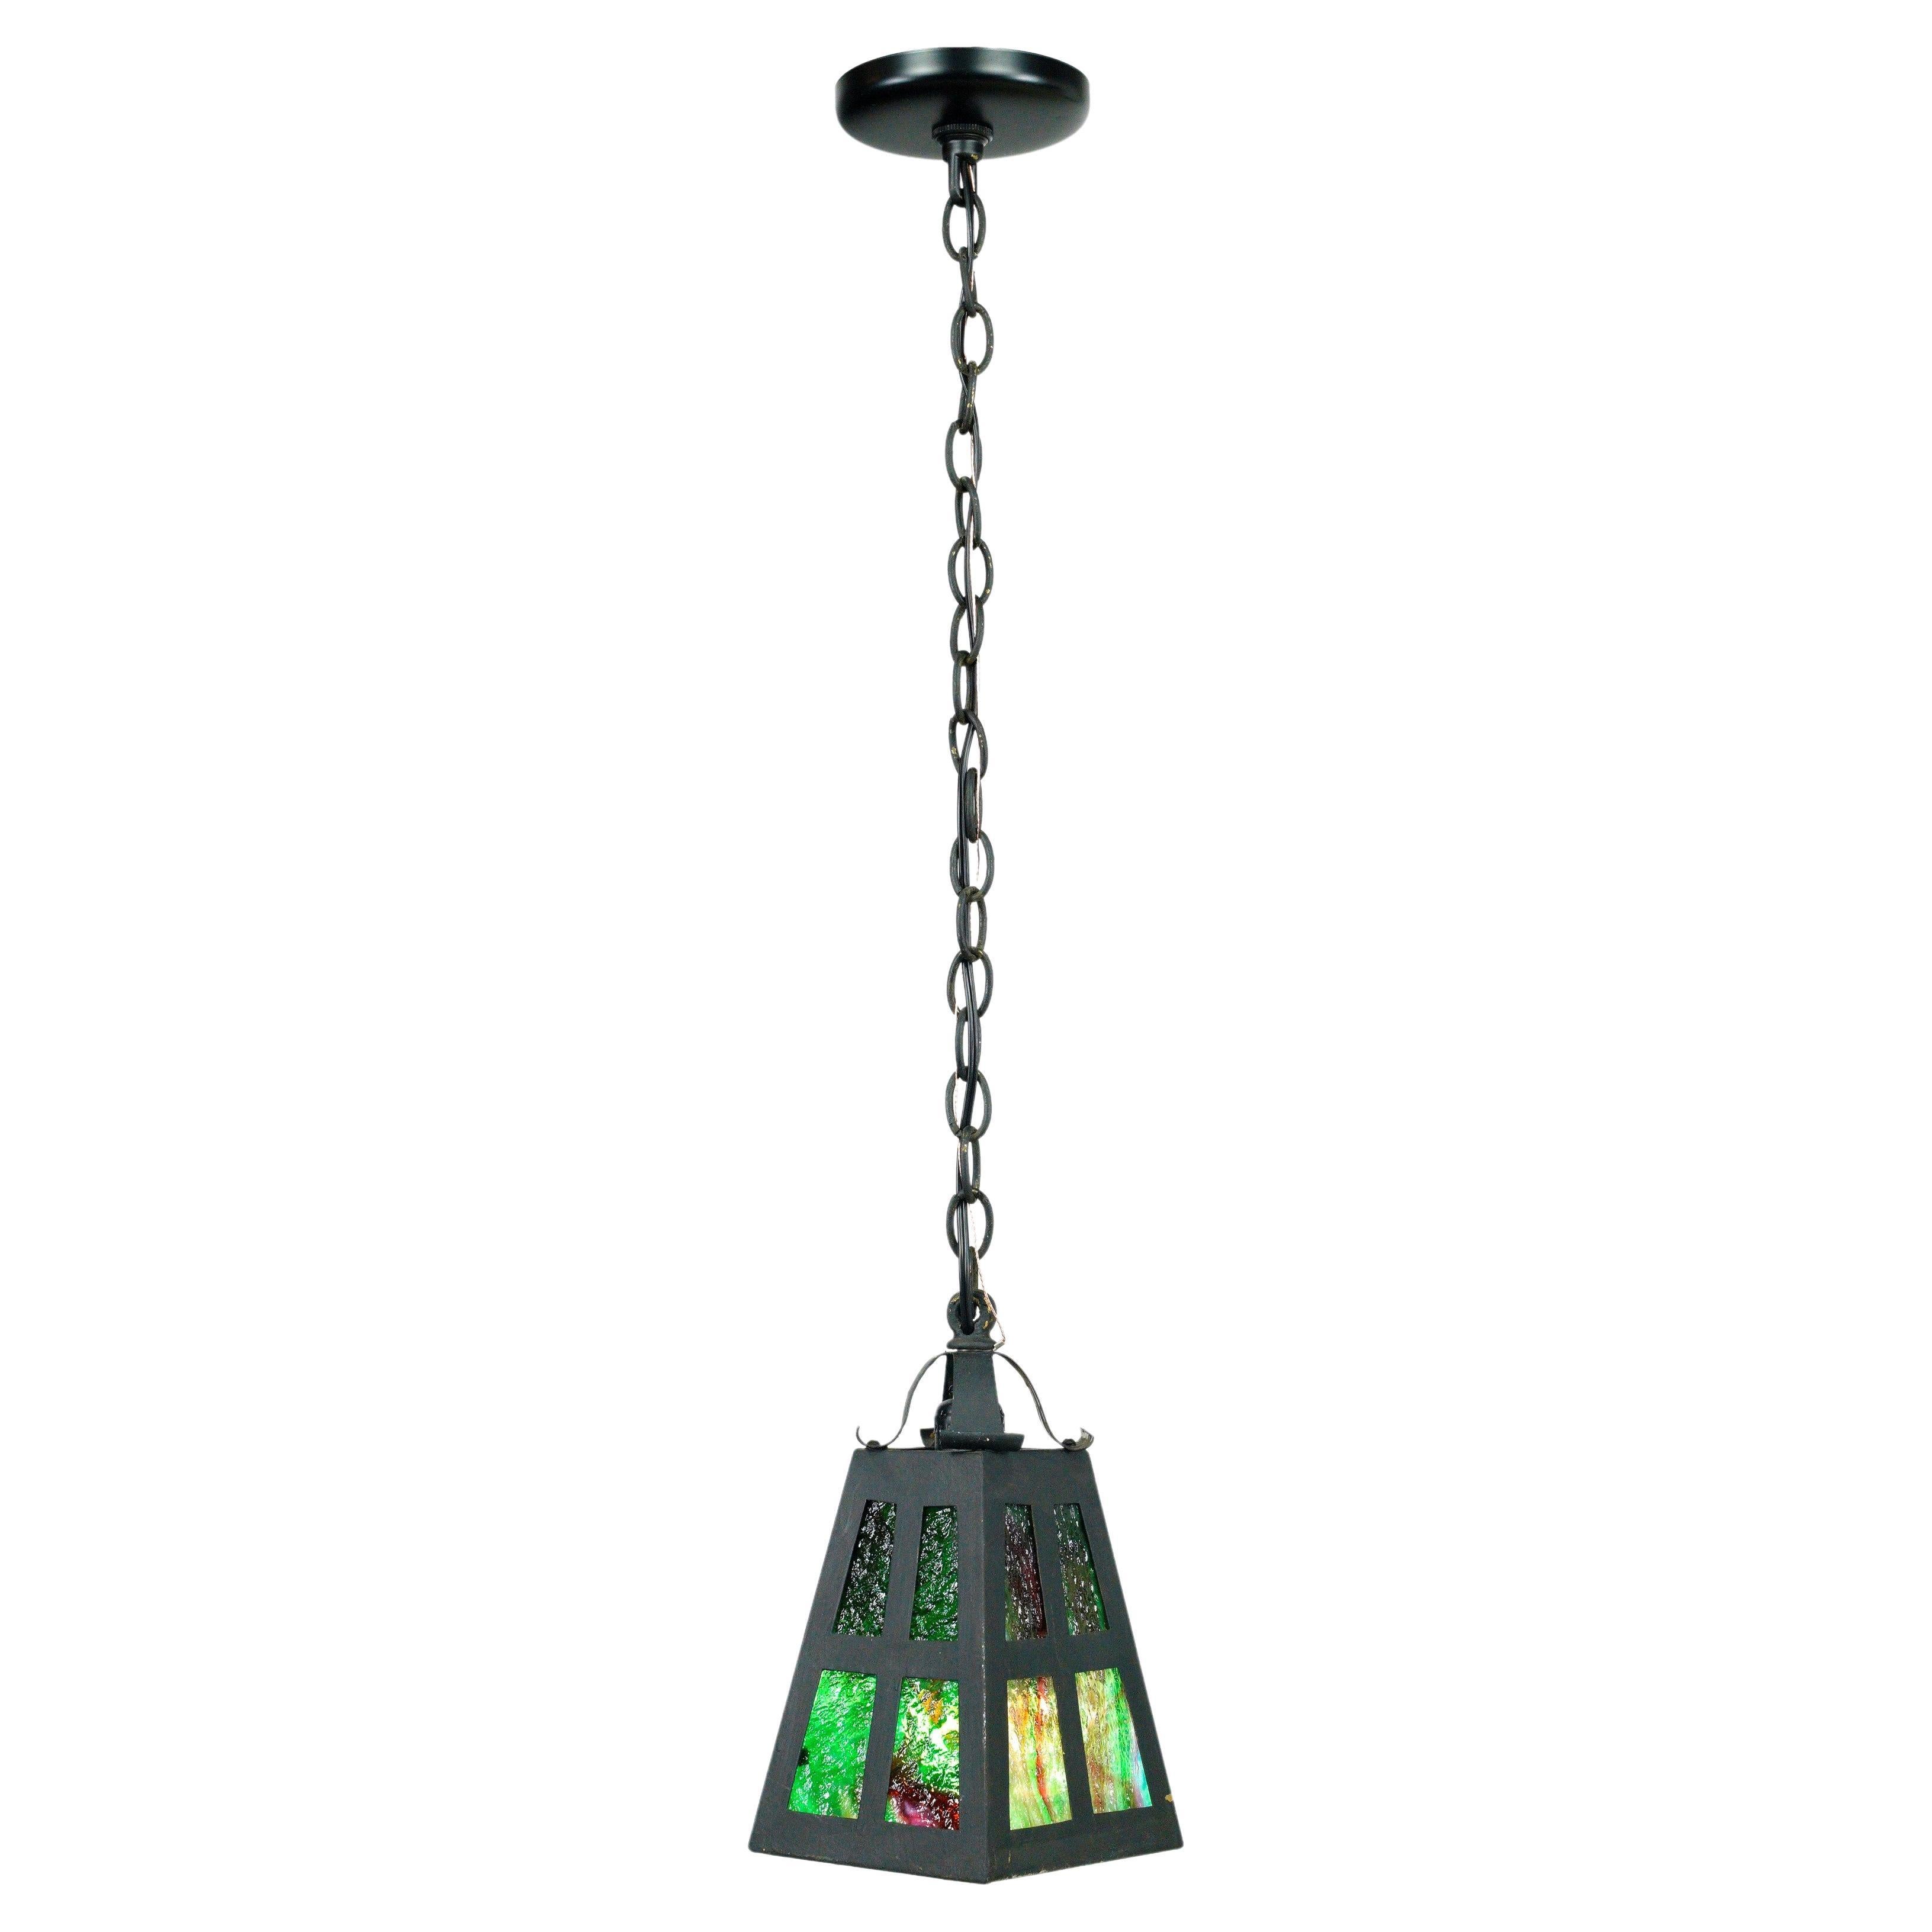 1920s Arts & Crafts Stained Glass Lantern Pendant Light